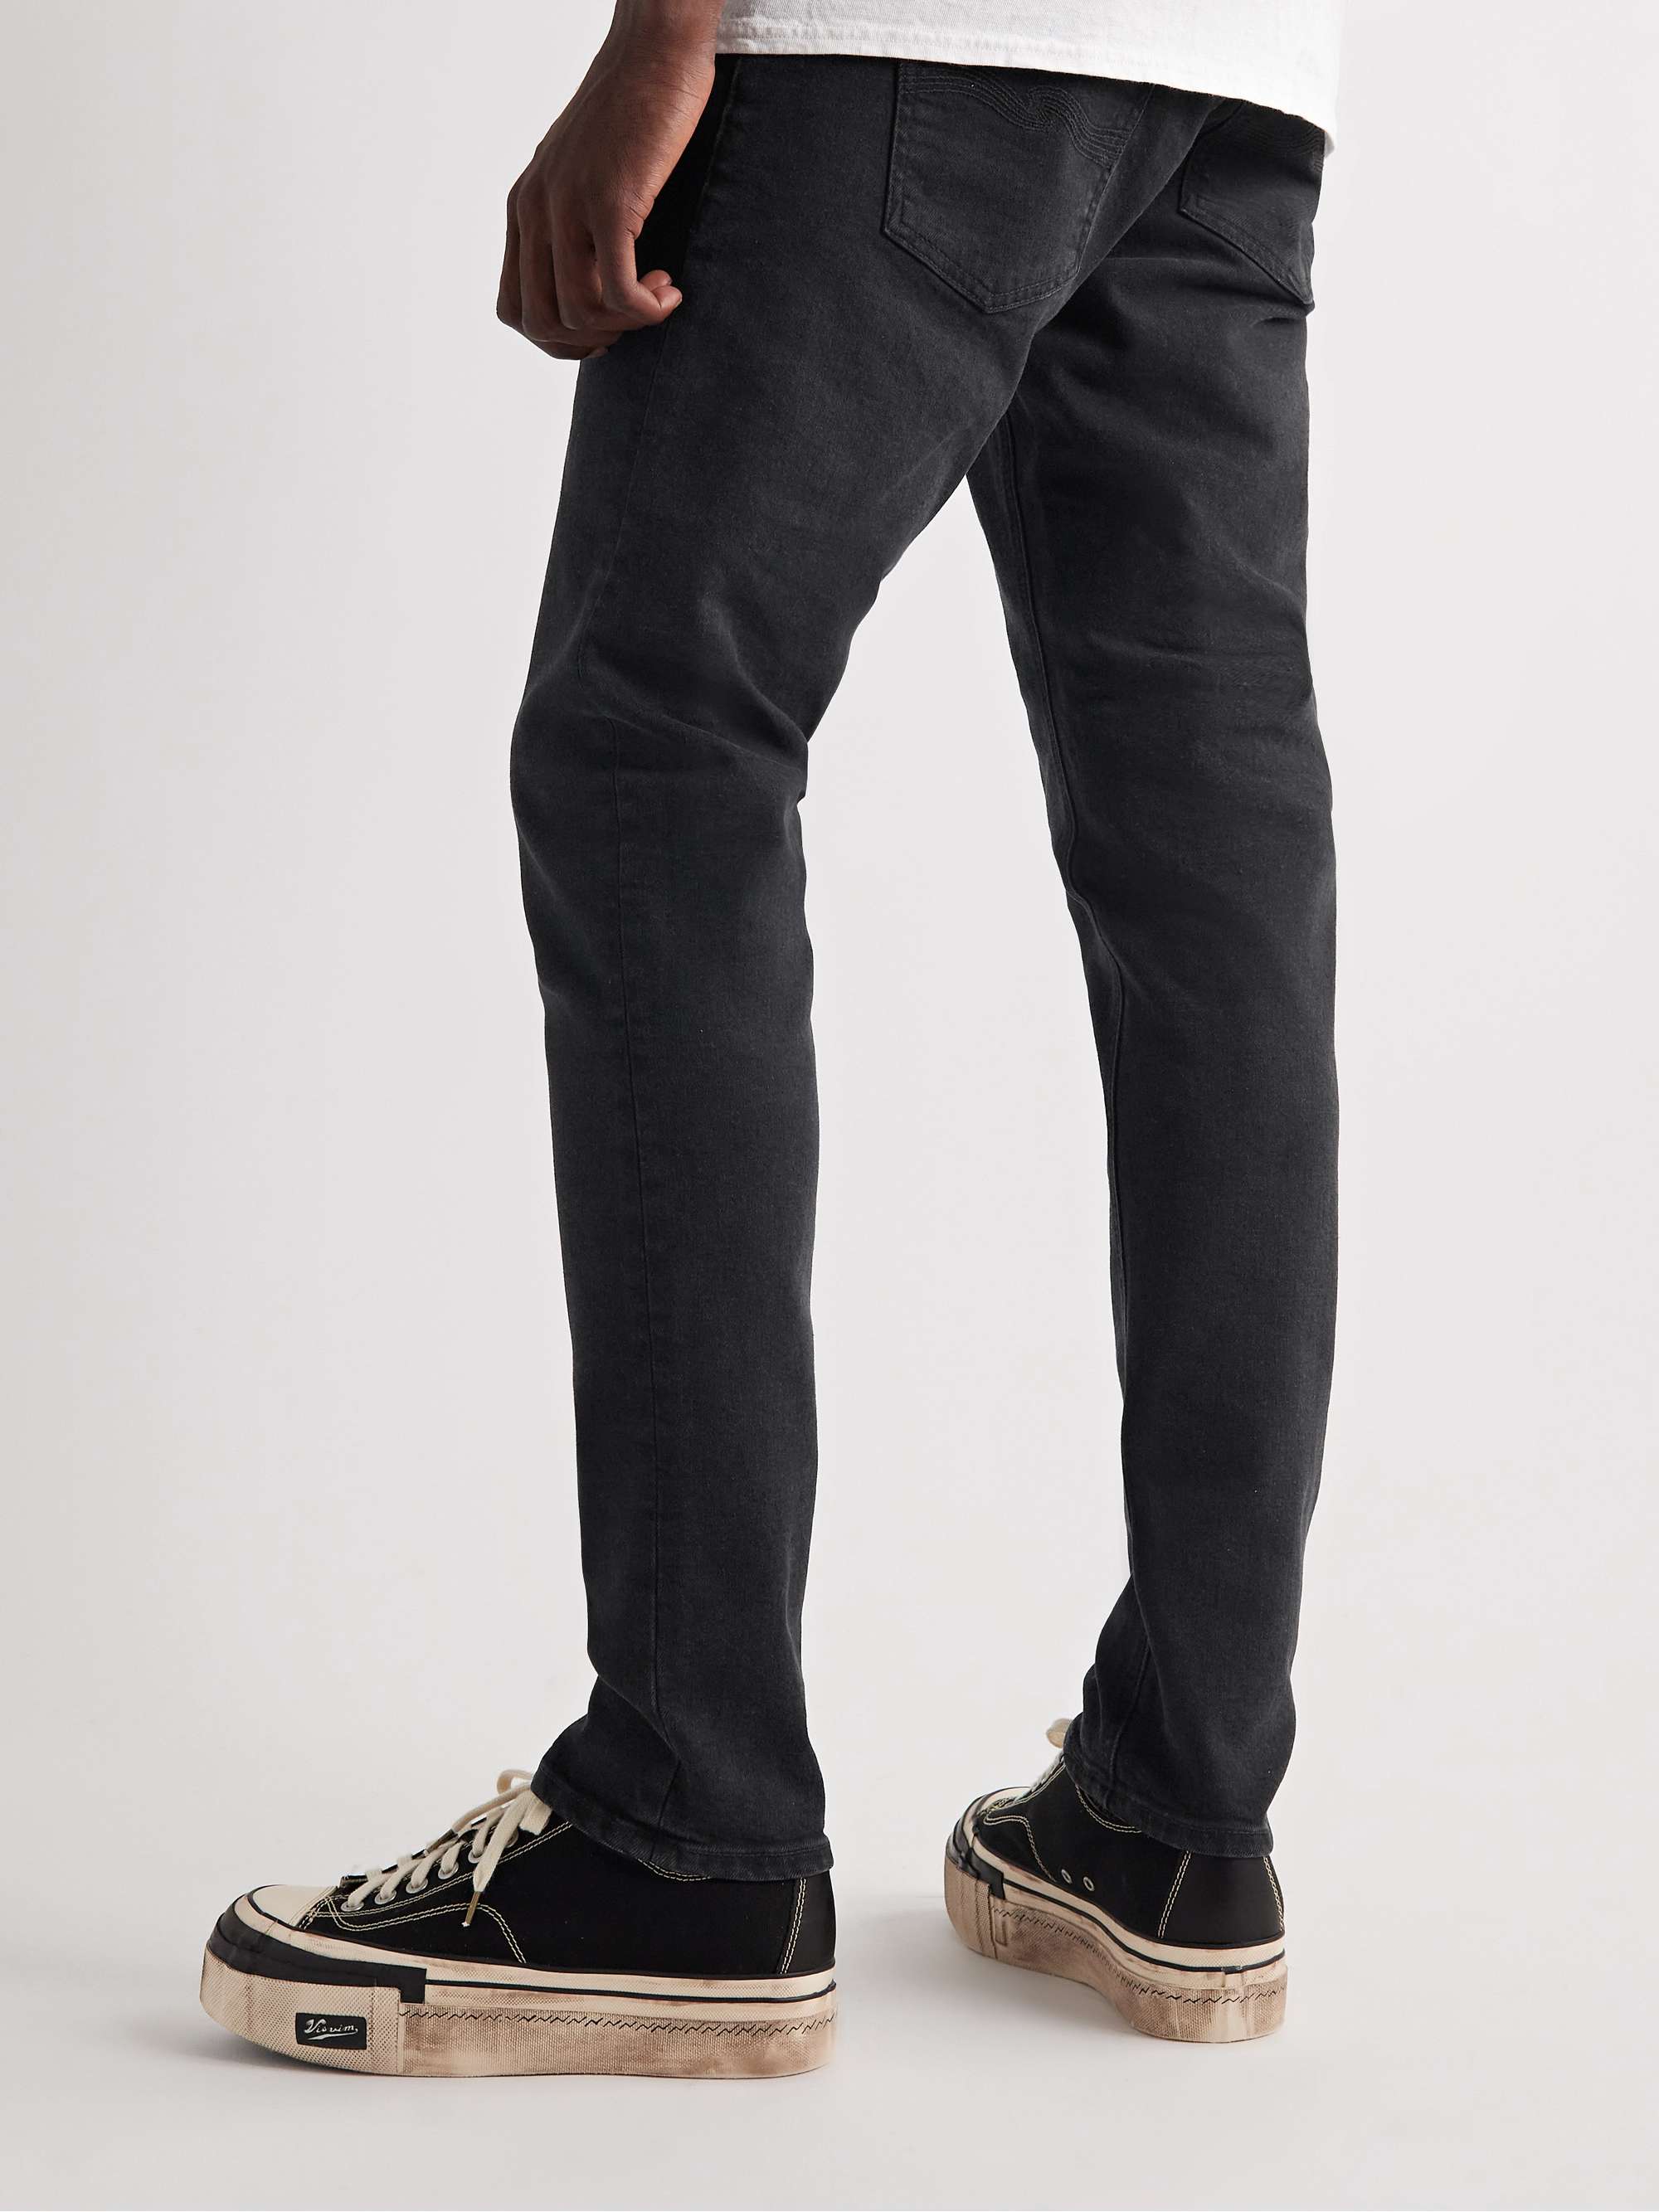 NUDIE JEANS Tight Terry Skinny-Fit Jeans | MR PORTER